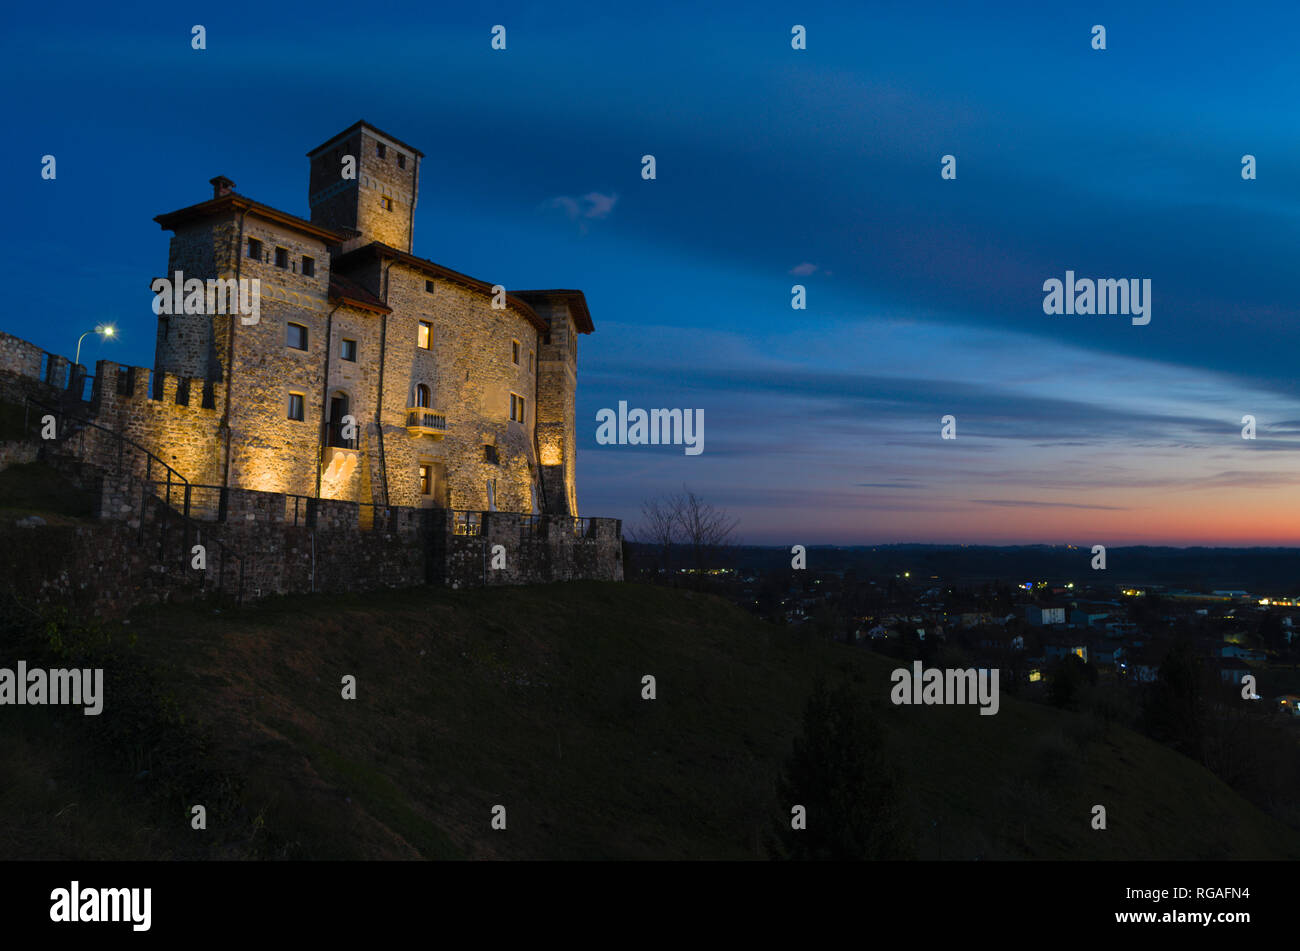 View of the Savorgnan’s Castle in Artegna, Friuli, after the sunset (blue hour) Stock Photo